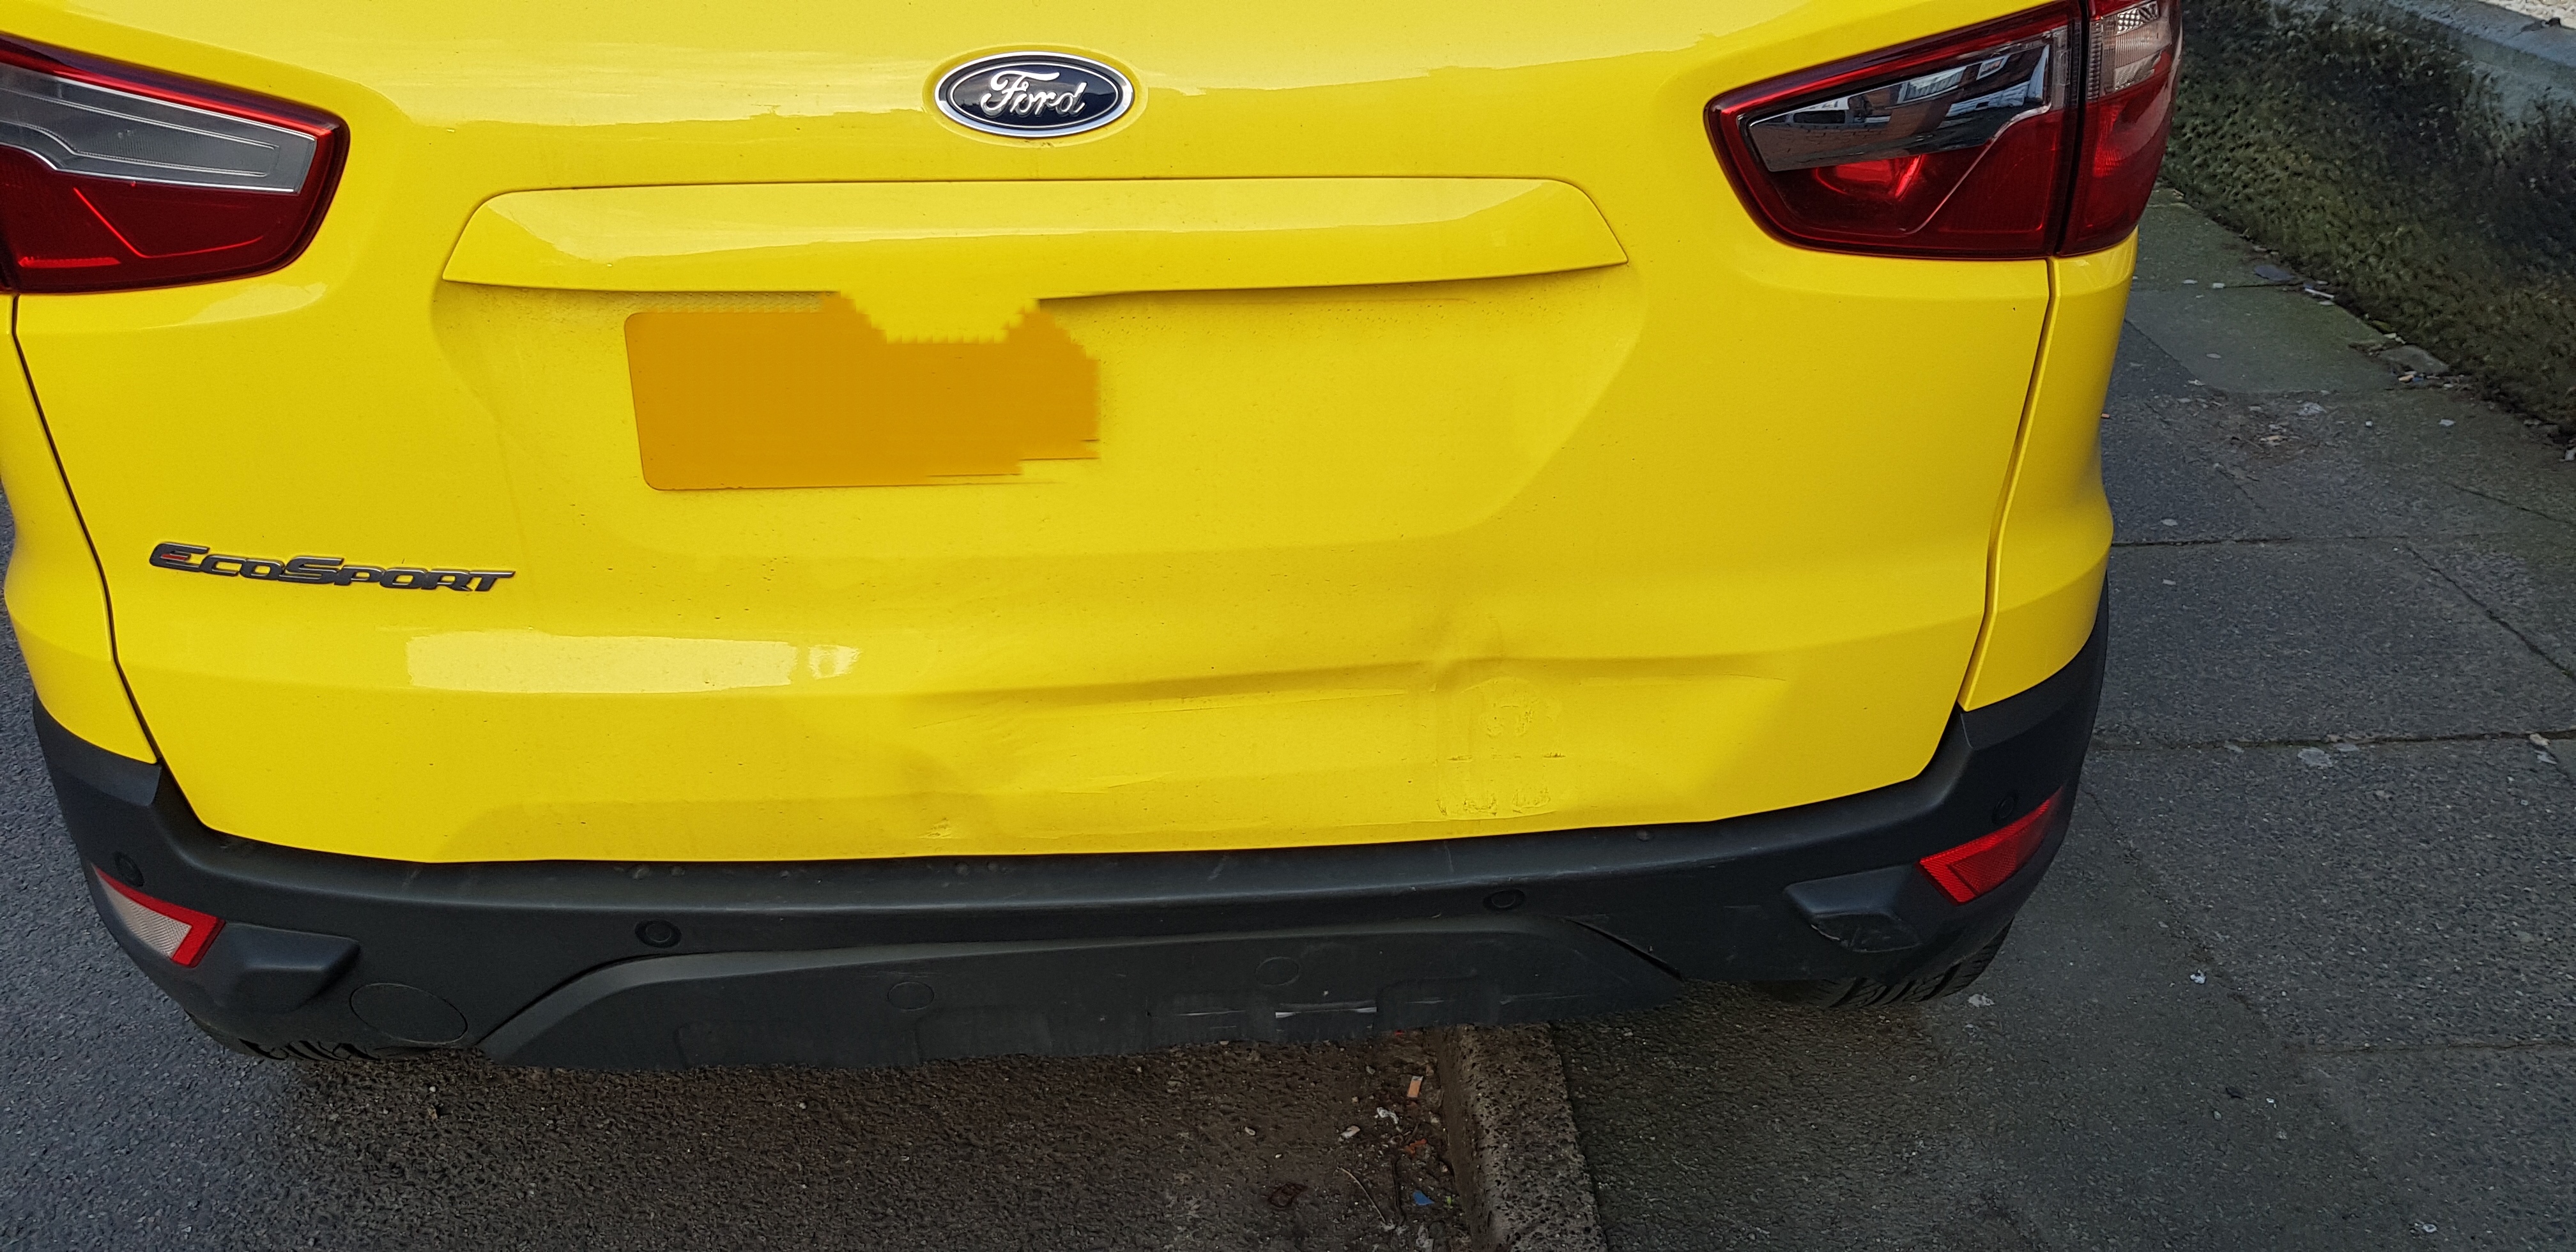 Paint on vehicle after RTC - New repaired parts don't match  - Page 1 - Bodywork & Detailing - PistonHeads